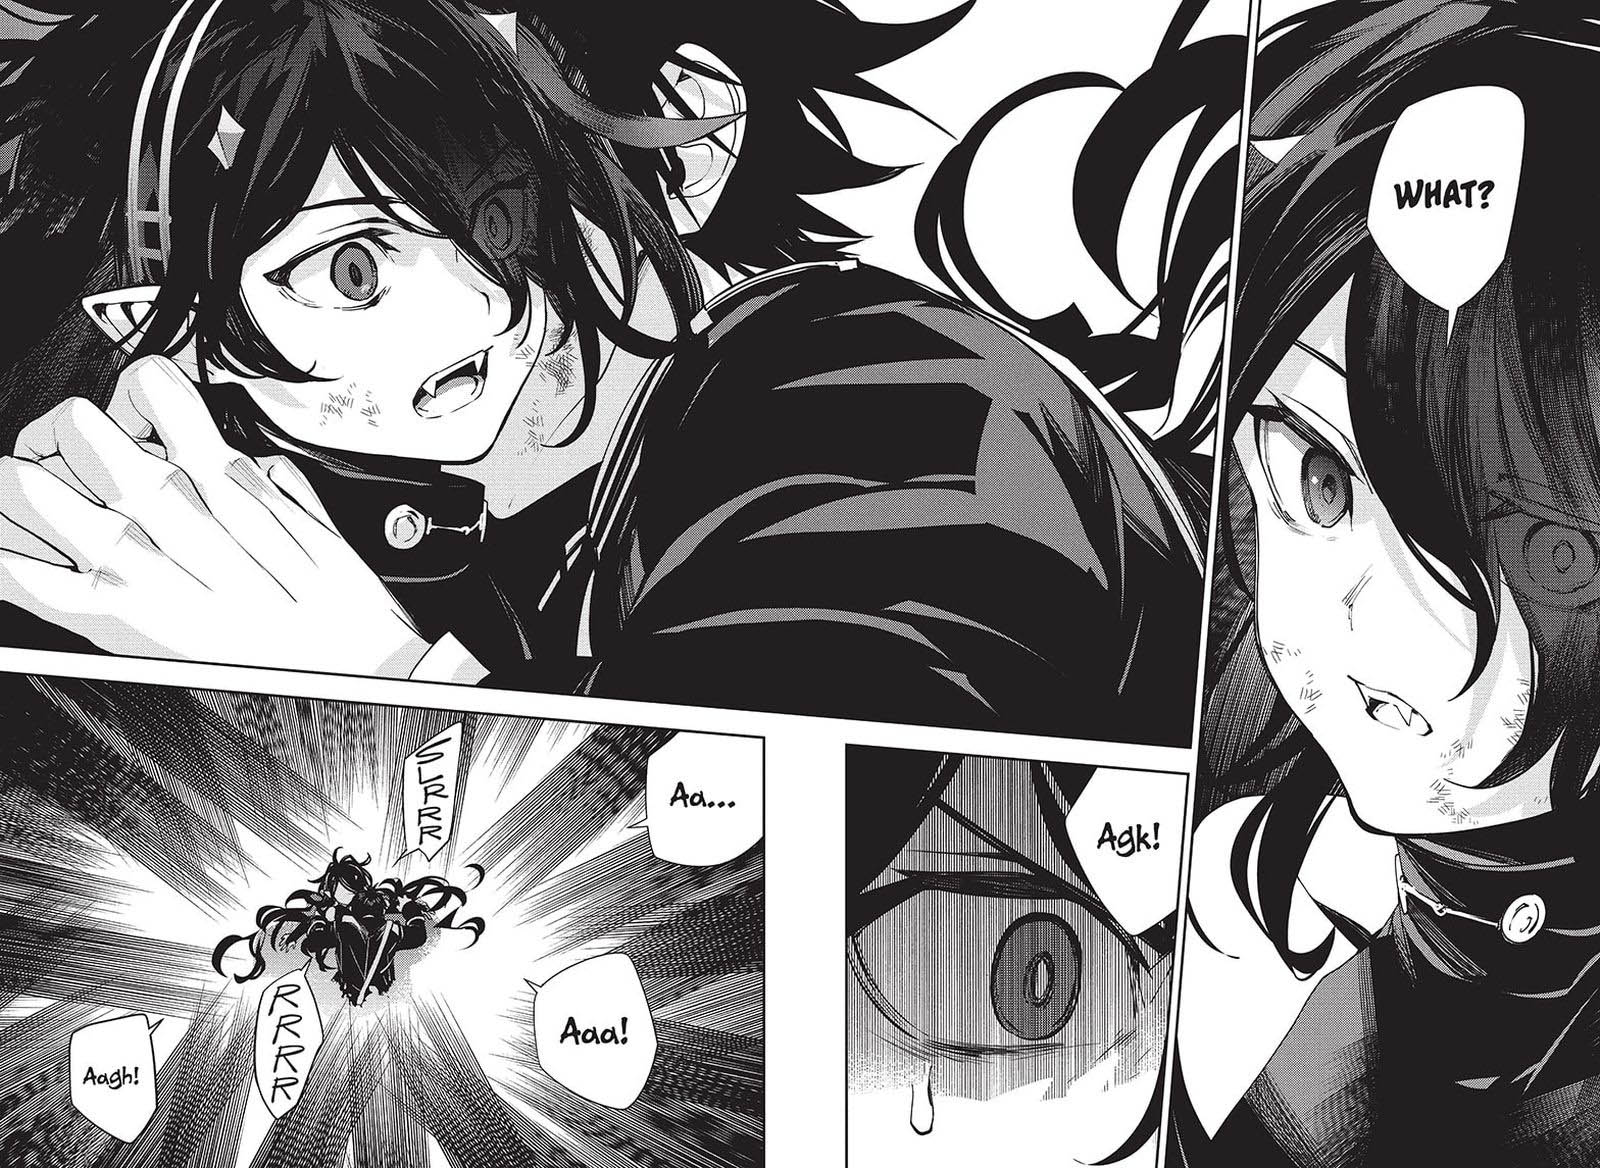 Seraph of the End: Vampire Reign. 